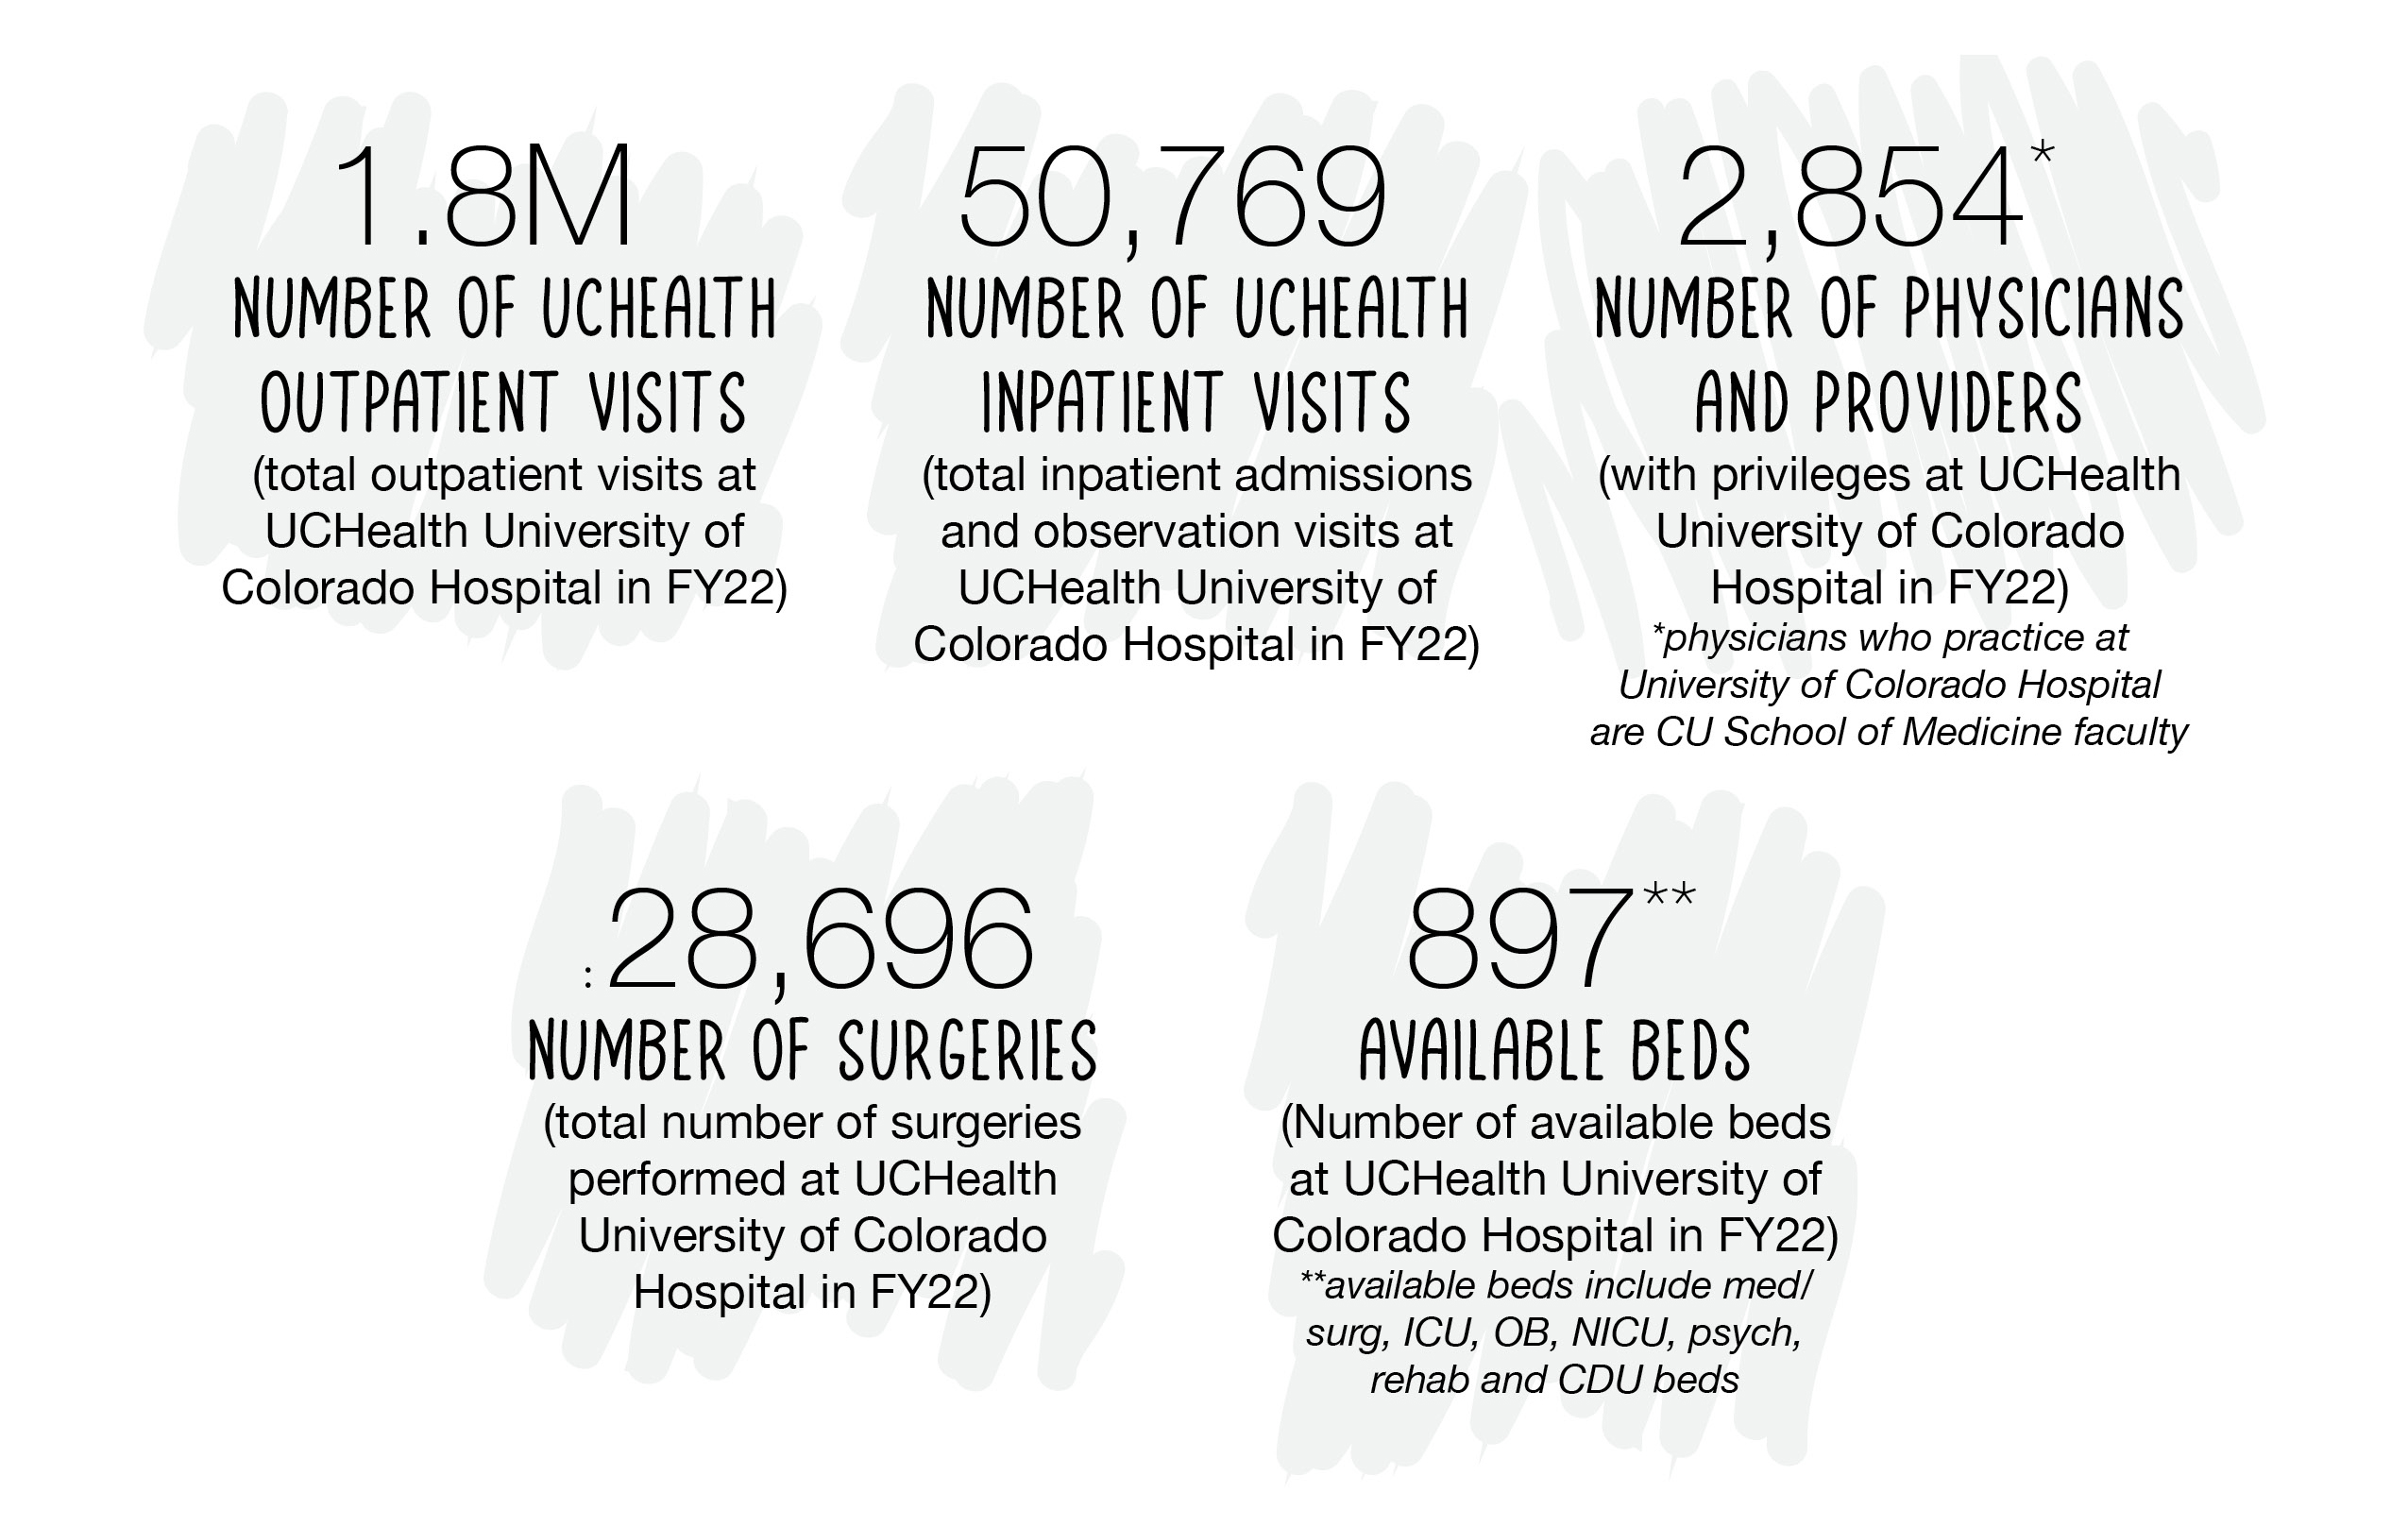 In FY22: 1.8M UCHealth outpatient visits, 50,769 UCHealth inpatient visits, 28,696 surgeries, 2,854 physicians and providers, and 897 available beds